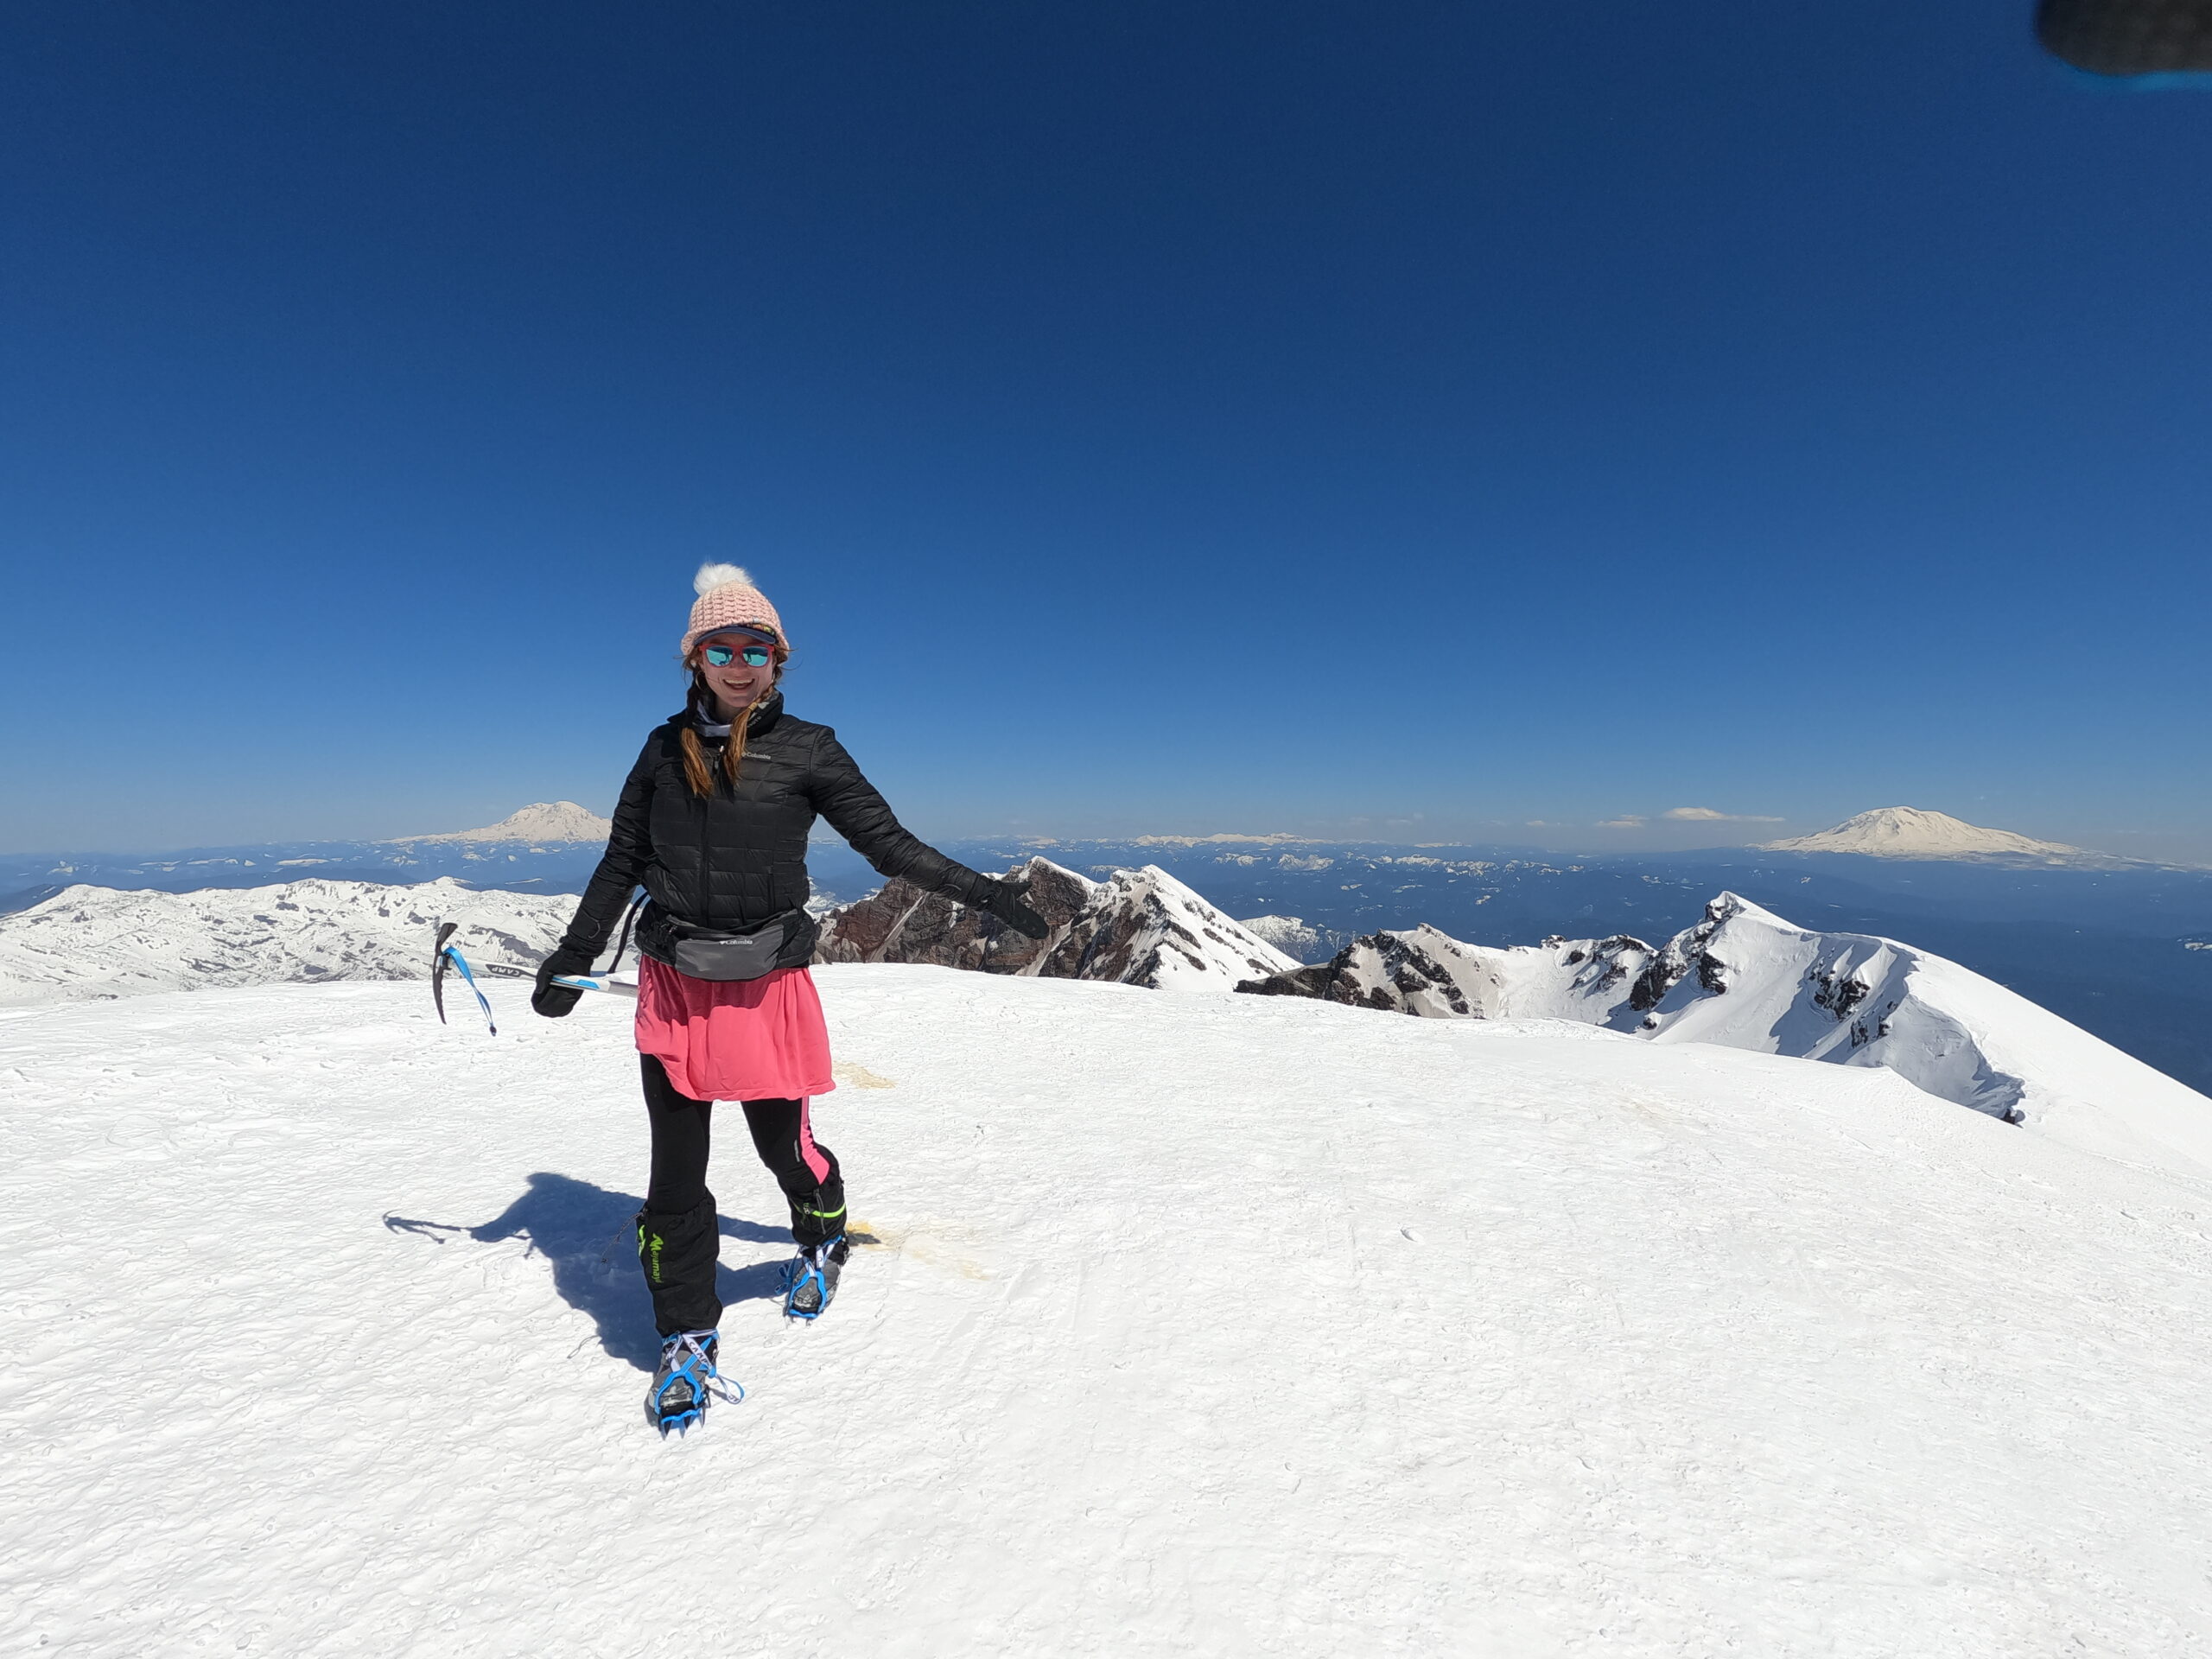 Cairn Project Ambassador Angie Marie holds an ice axe on a snowy mountaintop while wearing a pink skirt, black puffy jacket, crampons, and beanie